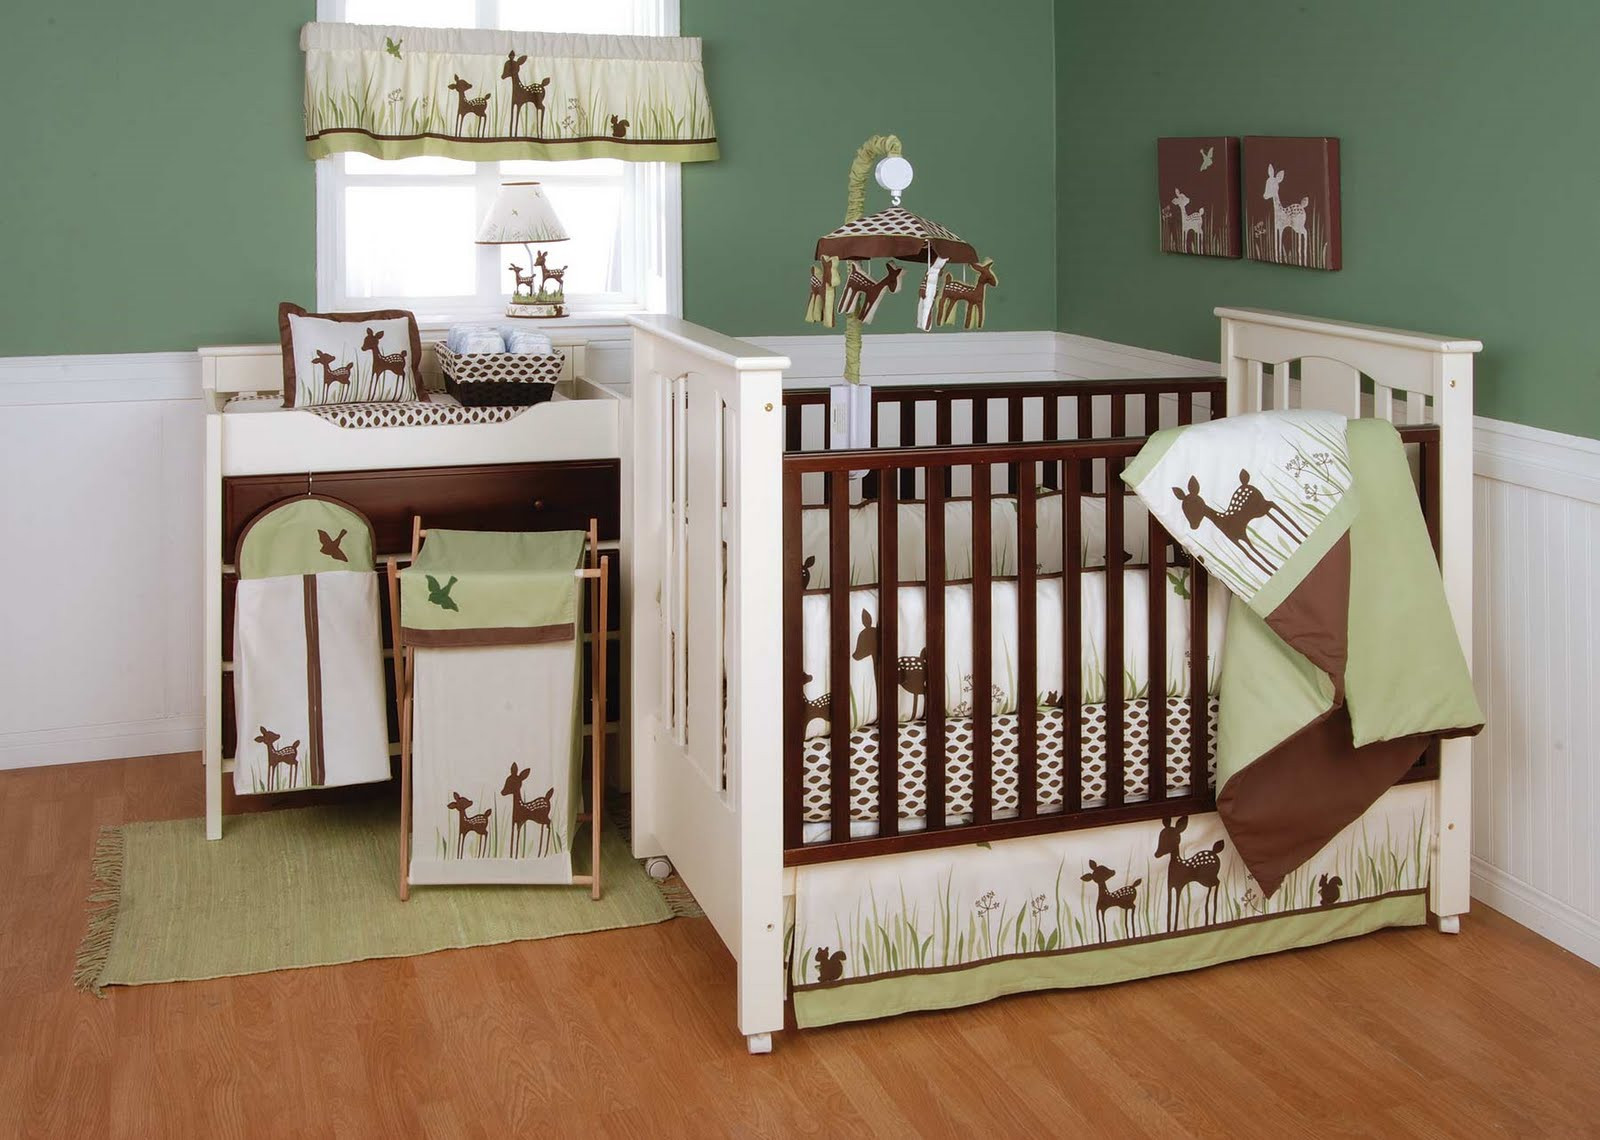 Baby Room Deer Decor
 Yay Baby registry is plete your "theme" if